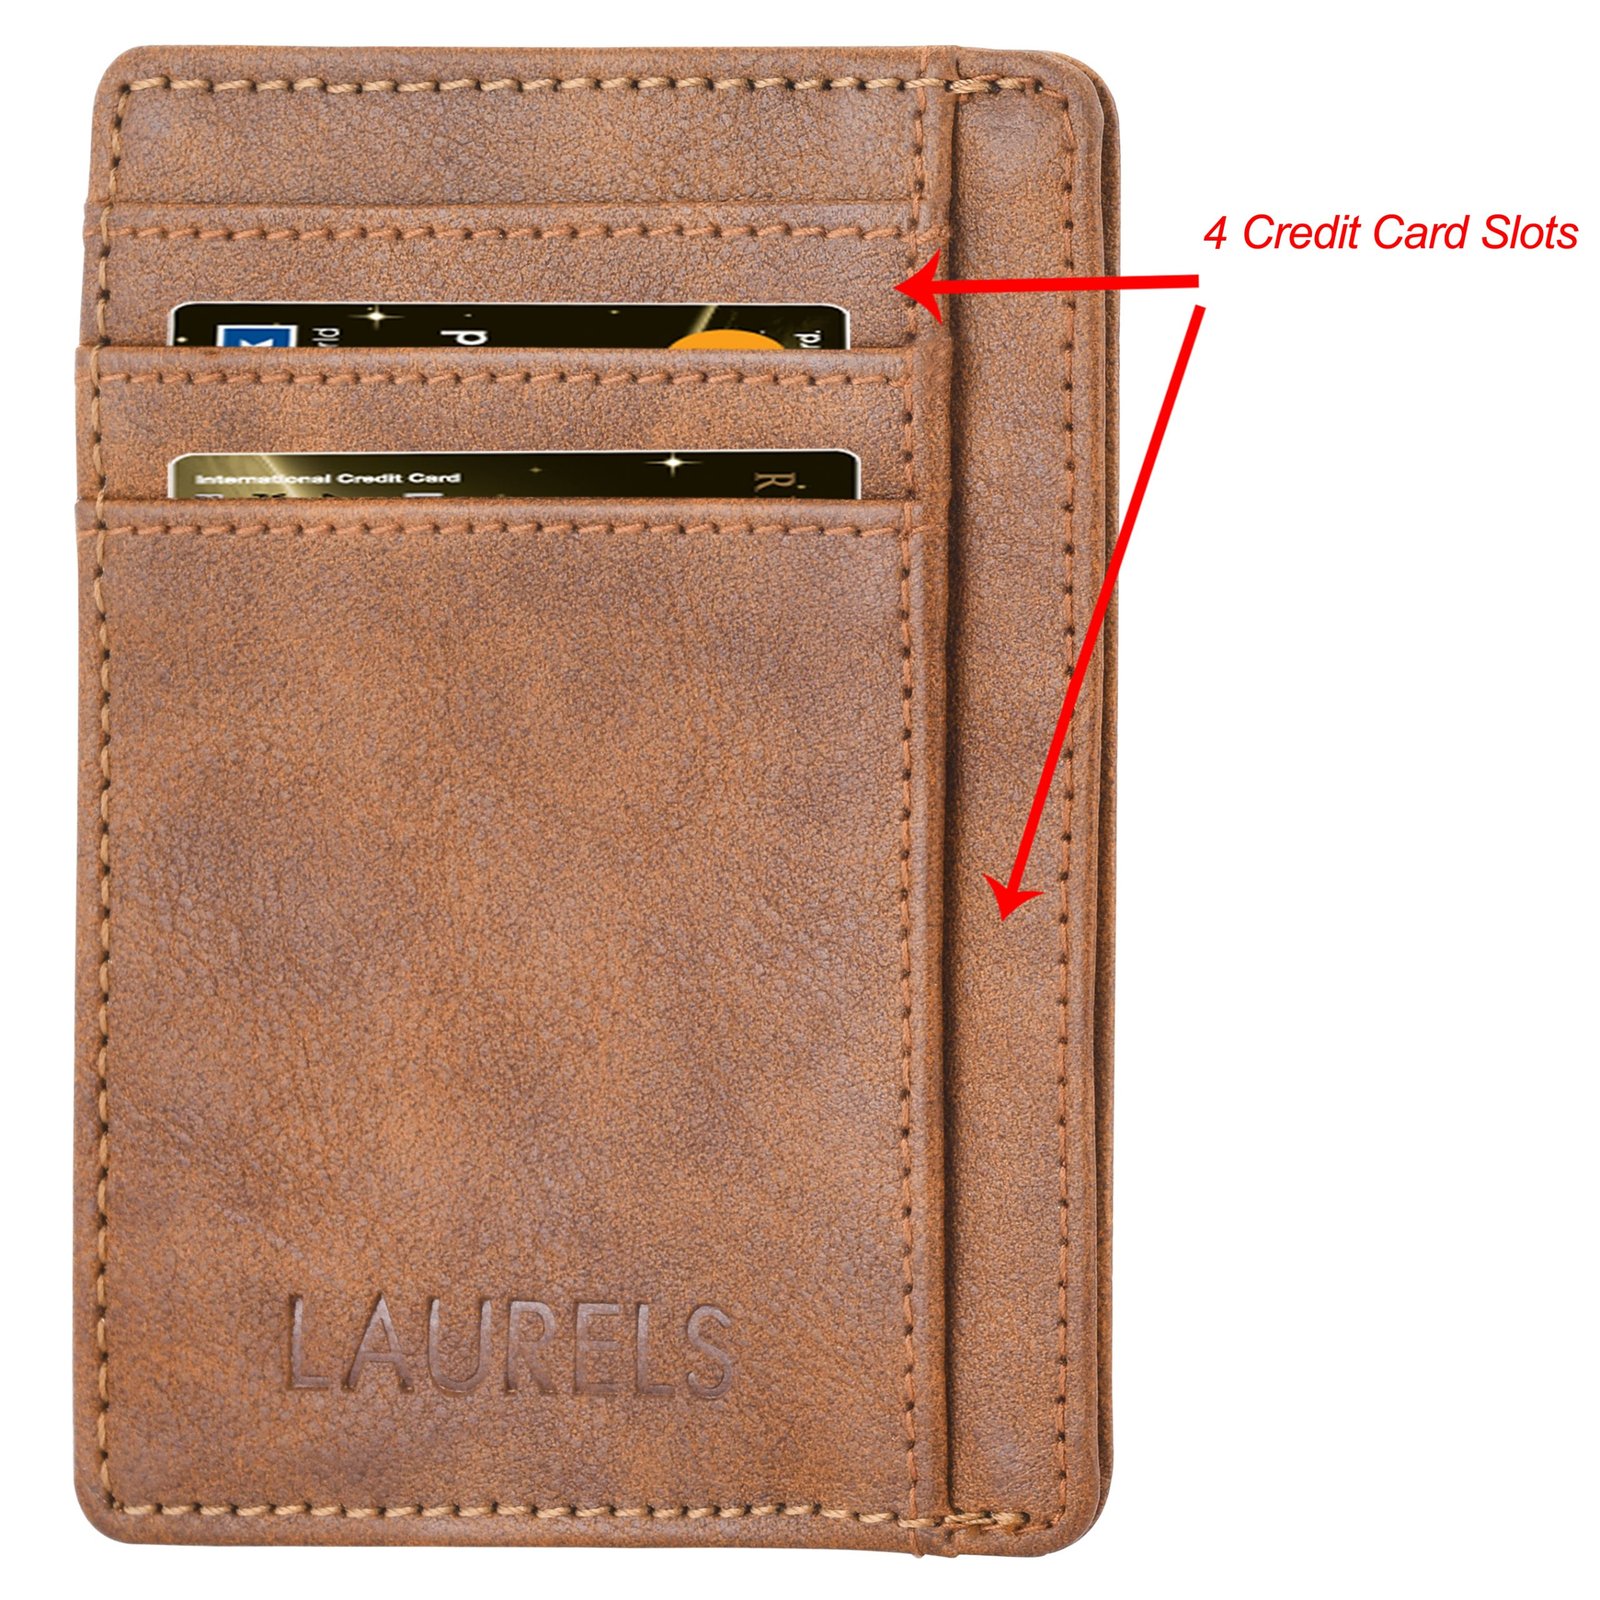 Rasper Brown Genuine Leather & Stainless Steel Credit Card Holder Business Card Holder Wallet ATM Card Holder with Magnetic Closure for Men & Women